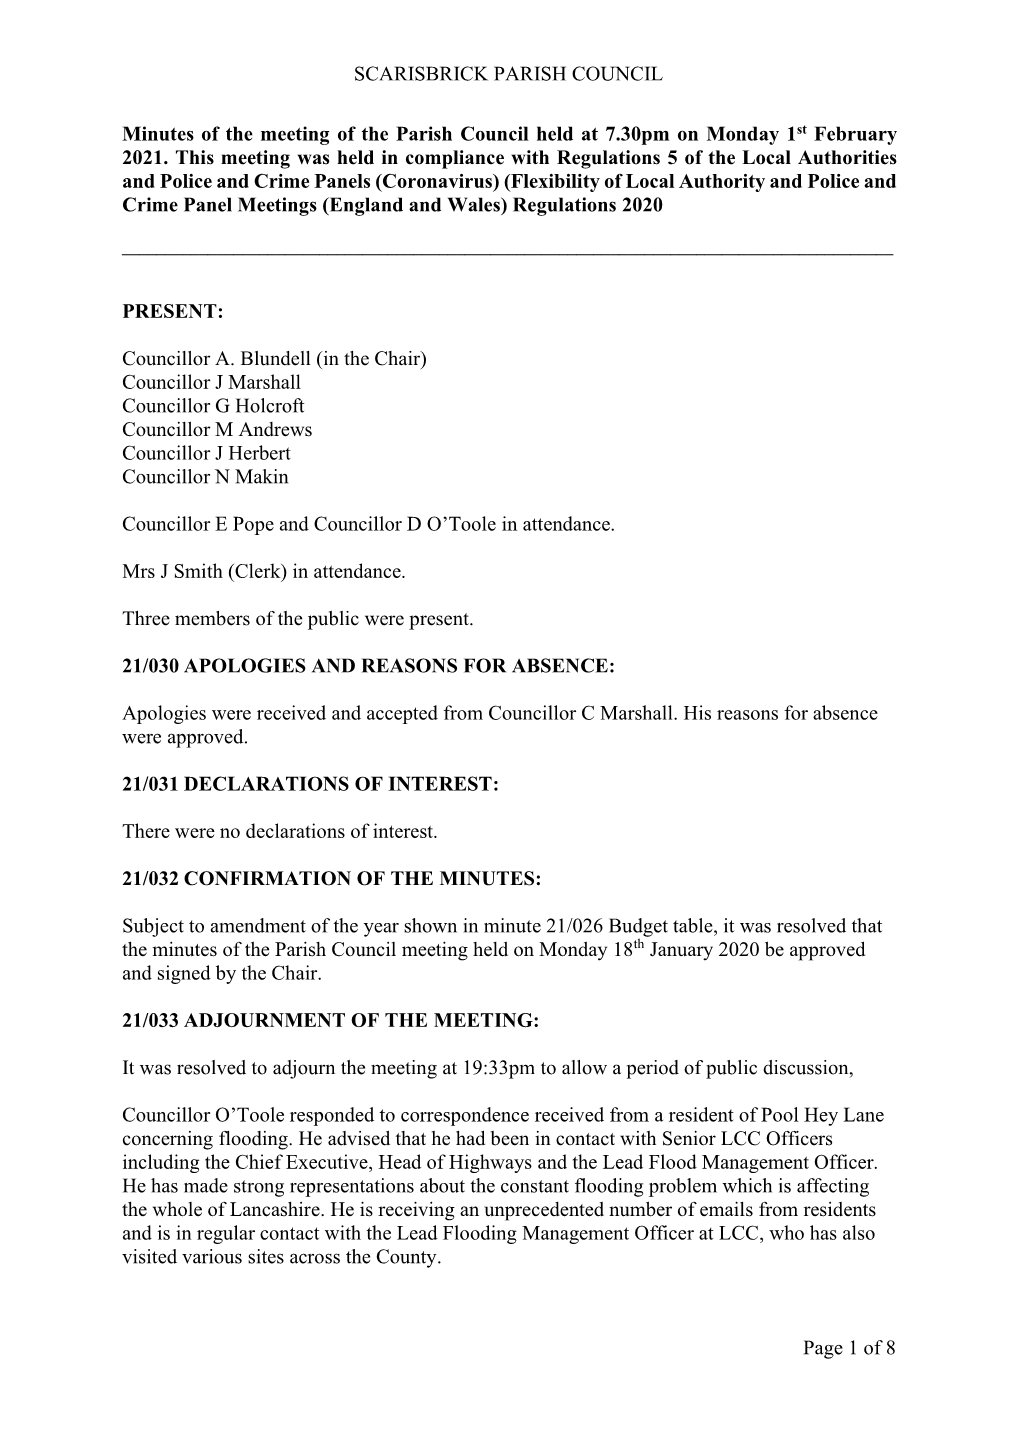 SCARISBRICK PARISH COUNCIL Page 1 of 8 Minutes of the Meeting